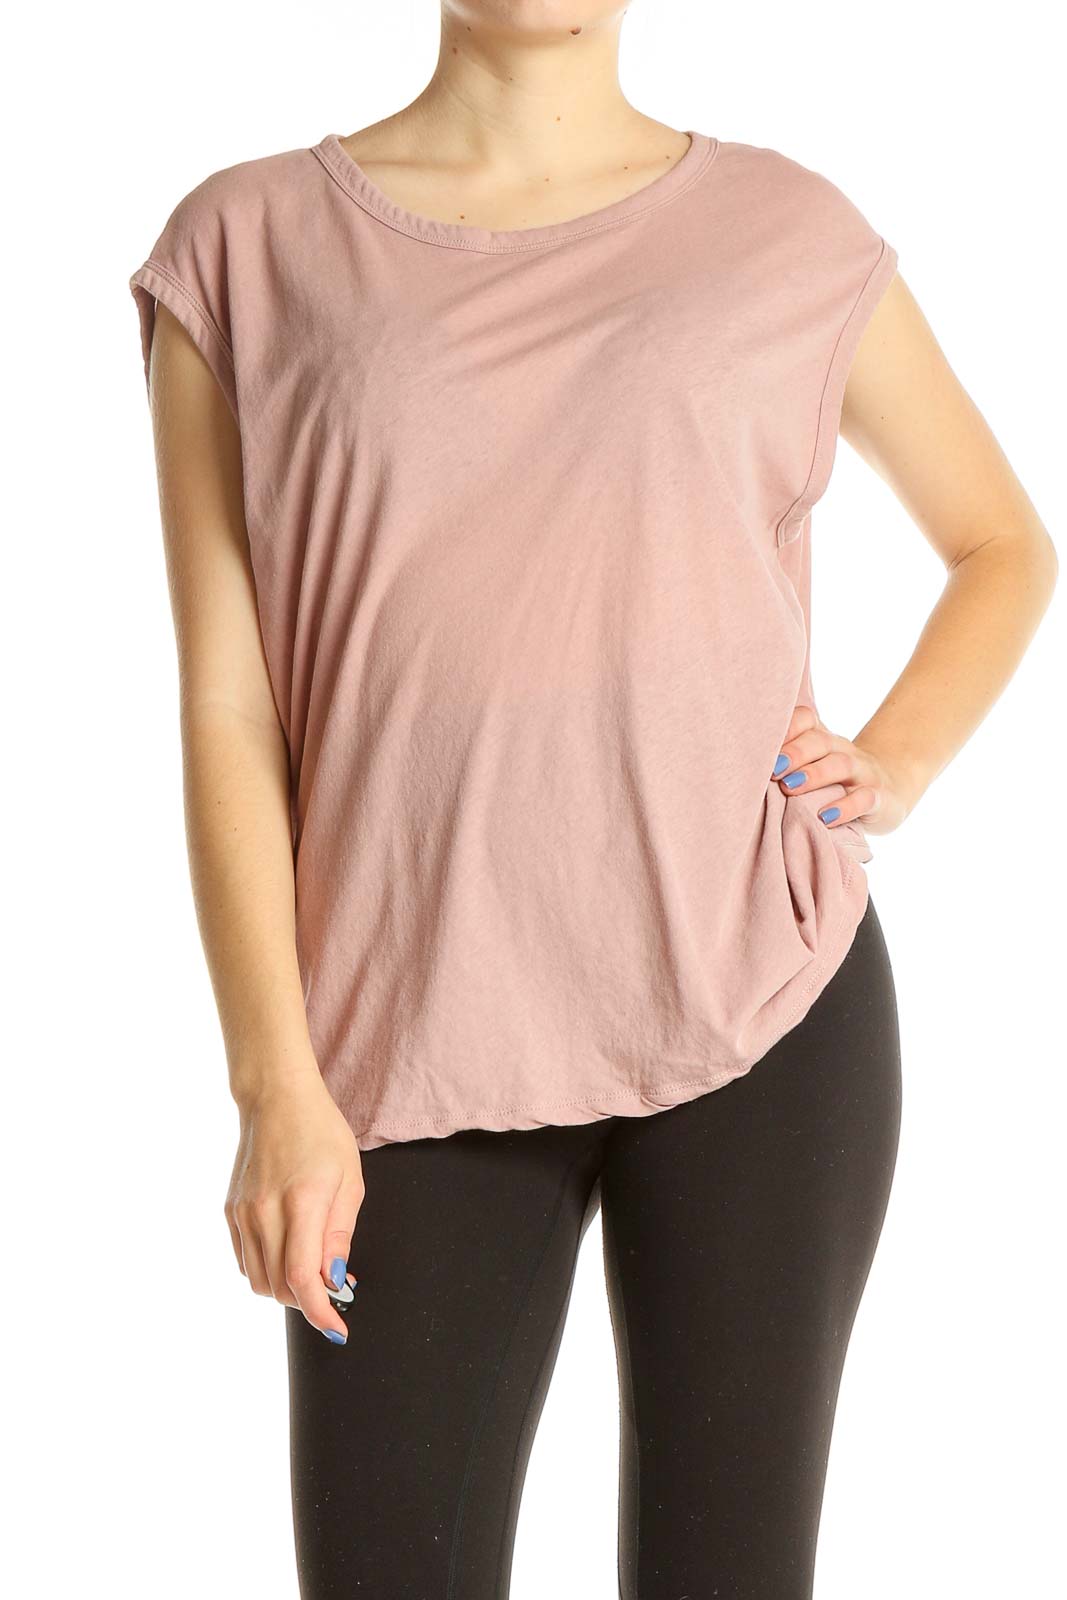 Pink All Day Wear Top Front